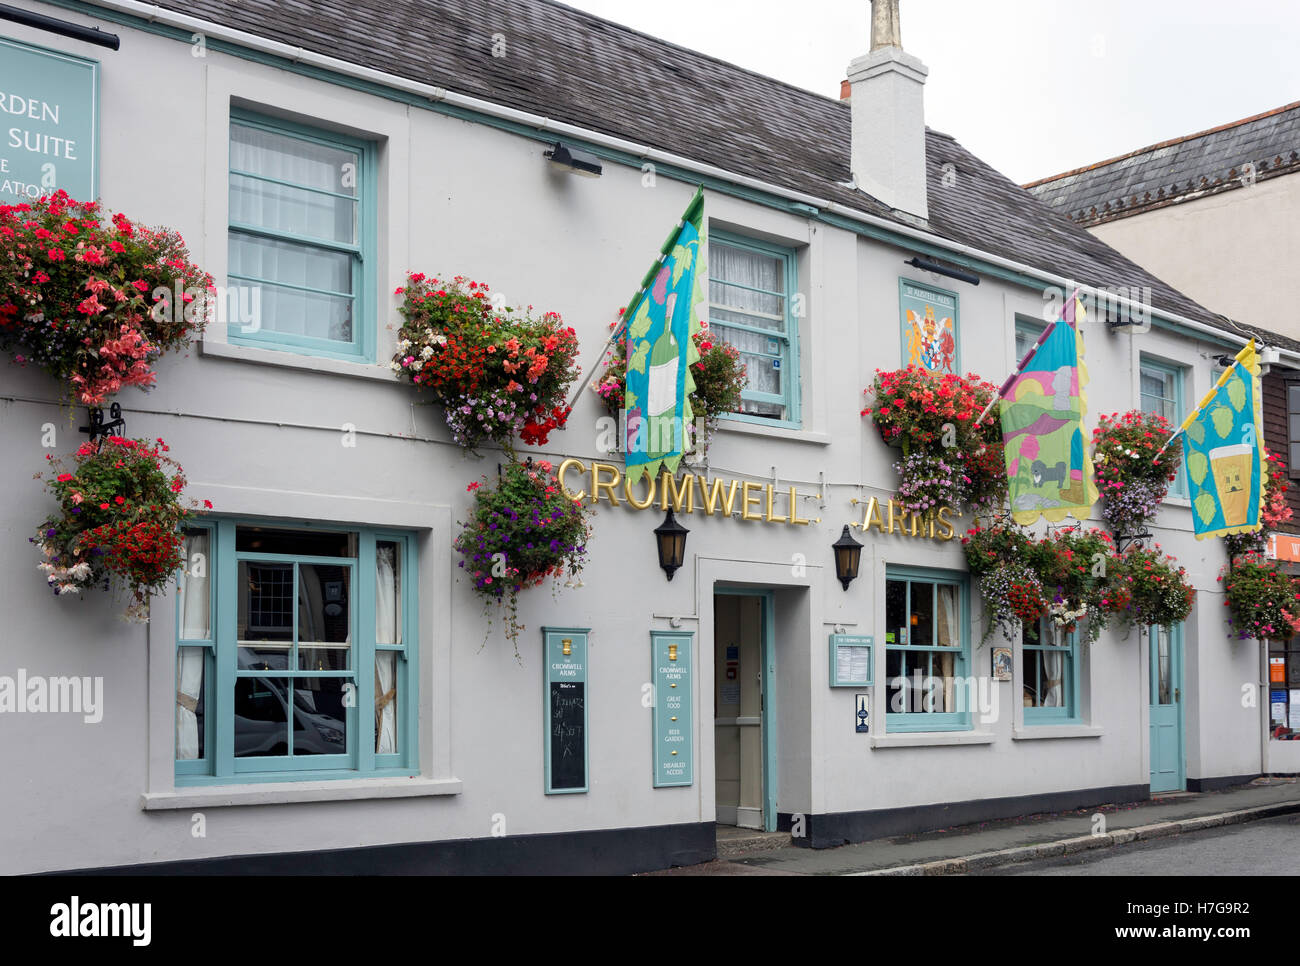 17th century The Cromwell Arms, Fore Street, Bovey Tracey, Devon, England, United Kingdom Stock Photo